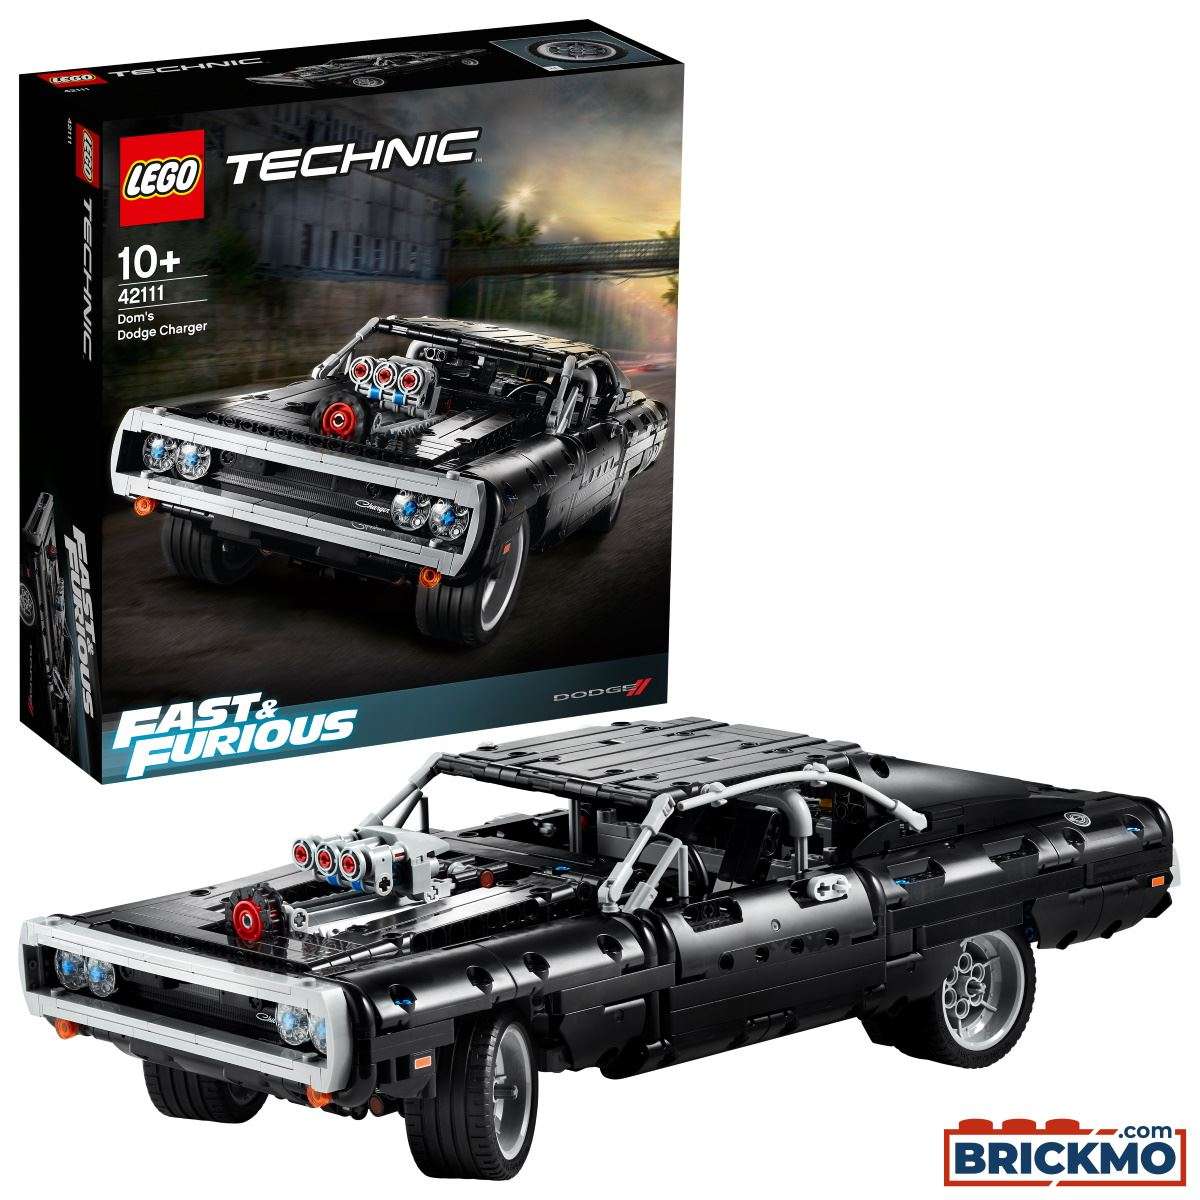 LEGO Technic 42111 Fast &amp; Furious Doms Dodge Charger 42111